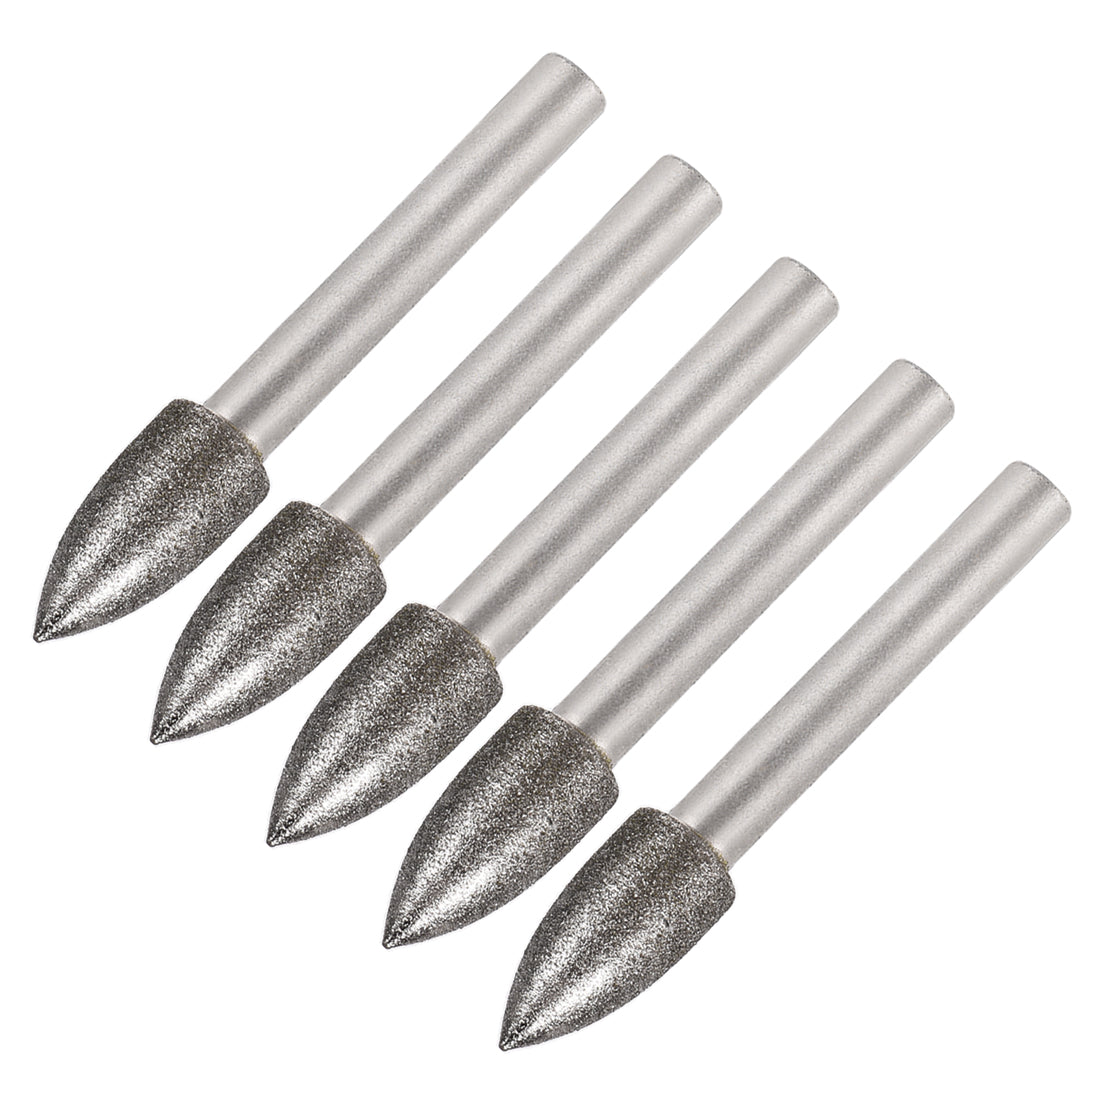 uxcell Uxcell Diamond Burrs Grinding Drill Bits for Carving Rotary Tool 1/4-Inch Shank 10mm Tapered 120 Grit 5 Pcs